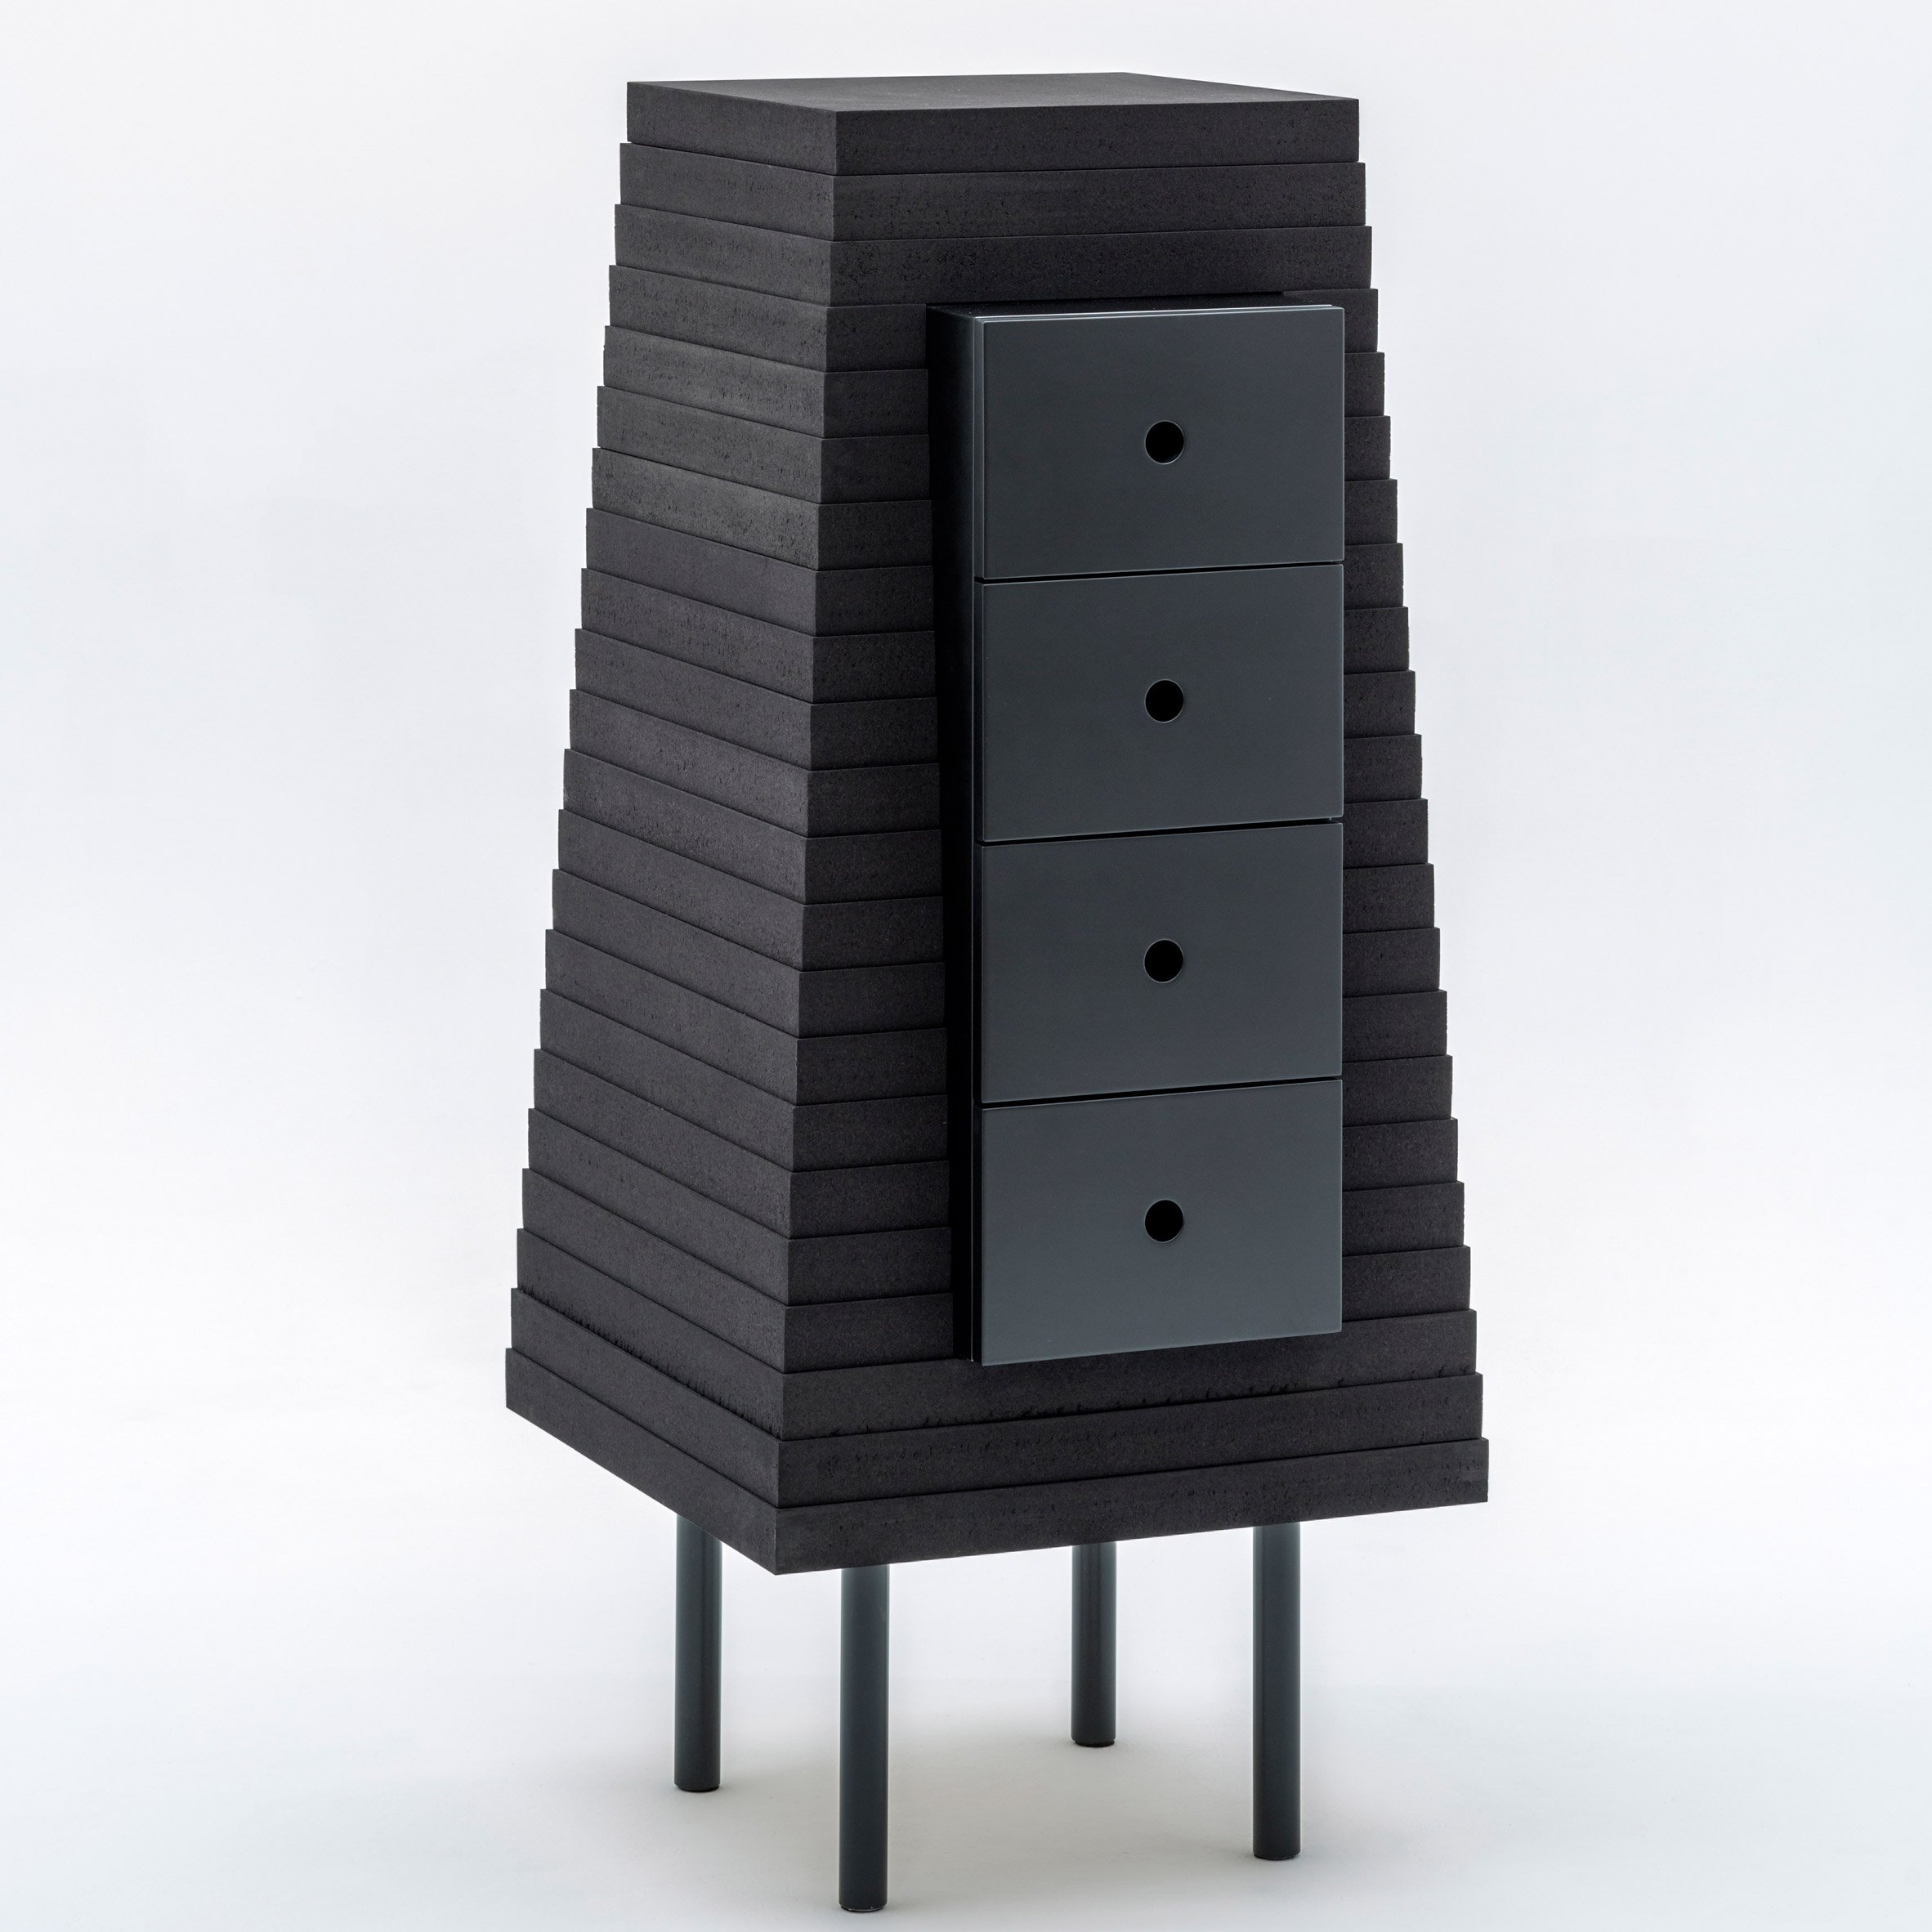 Piece D is a chest of drawers made from black cork